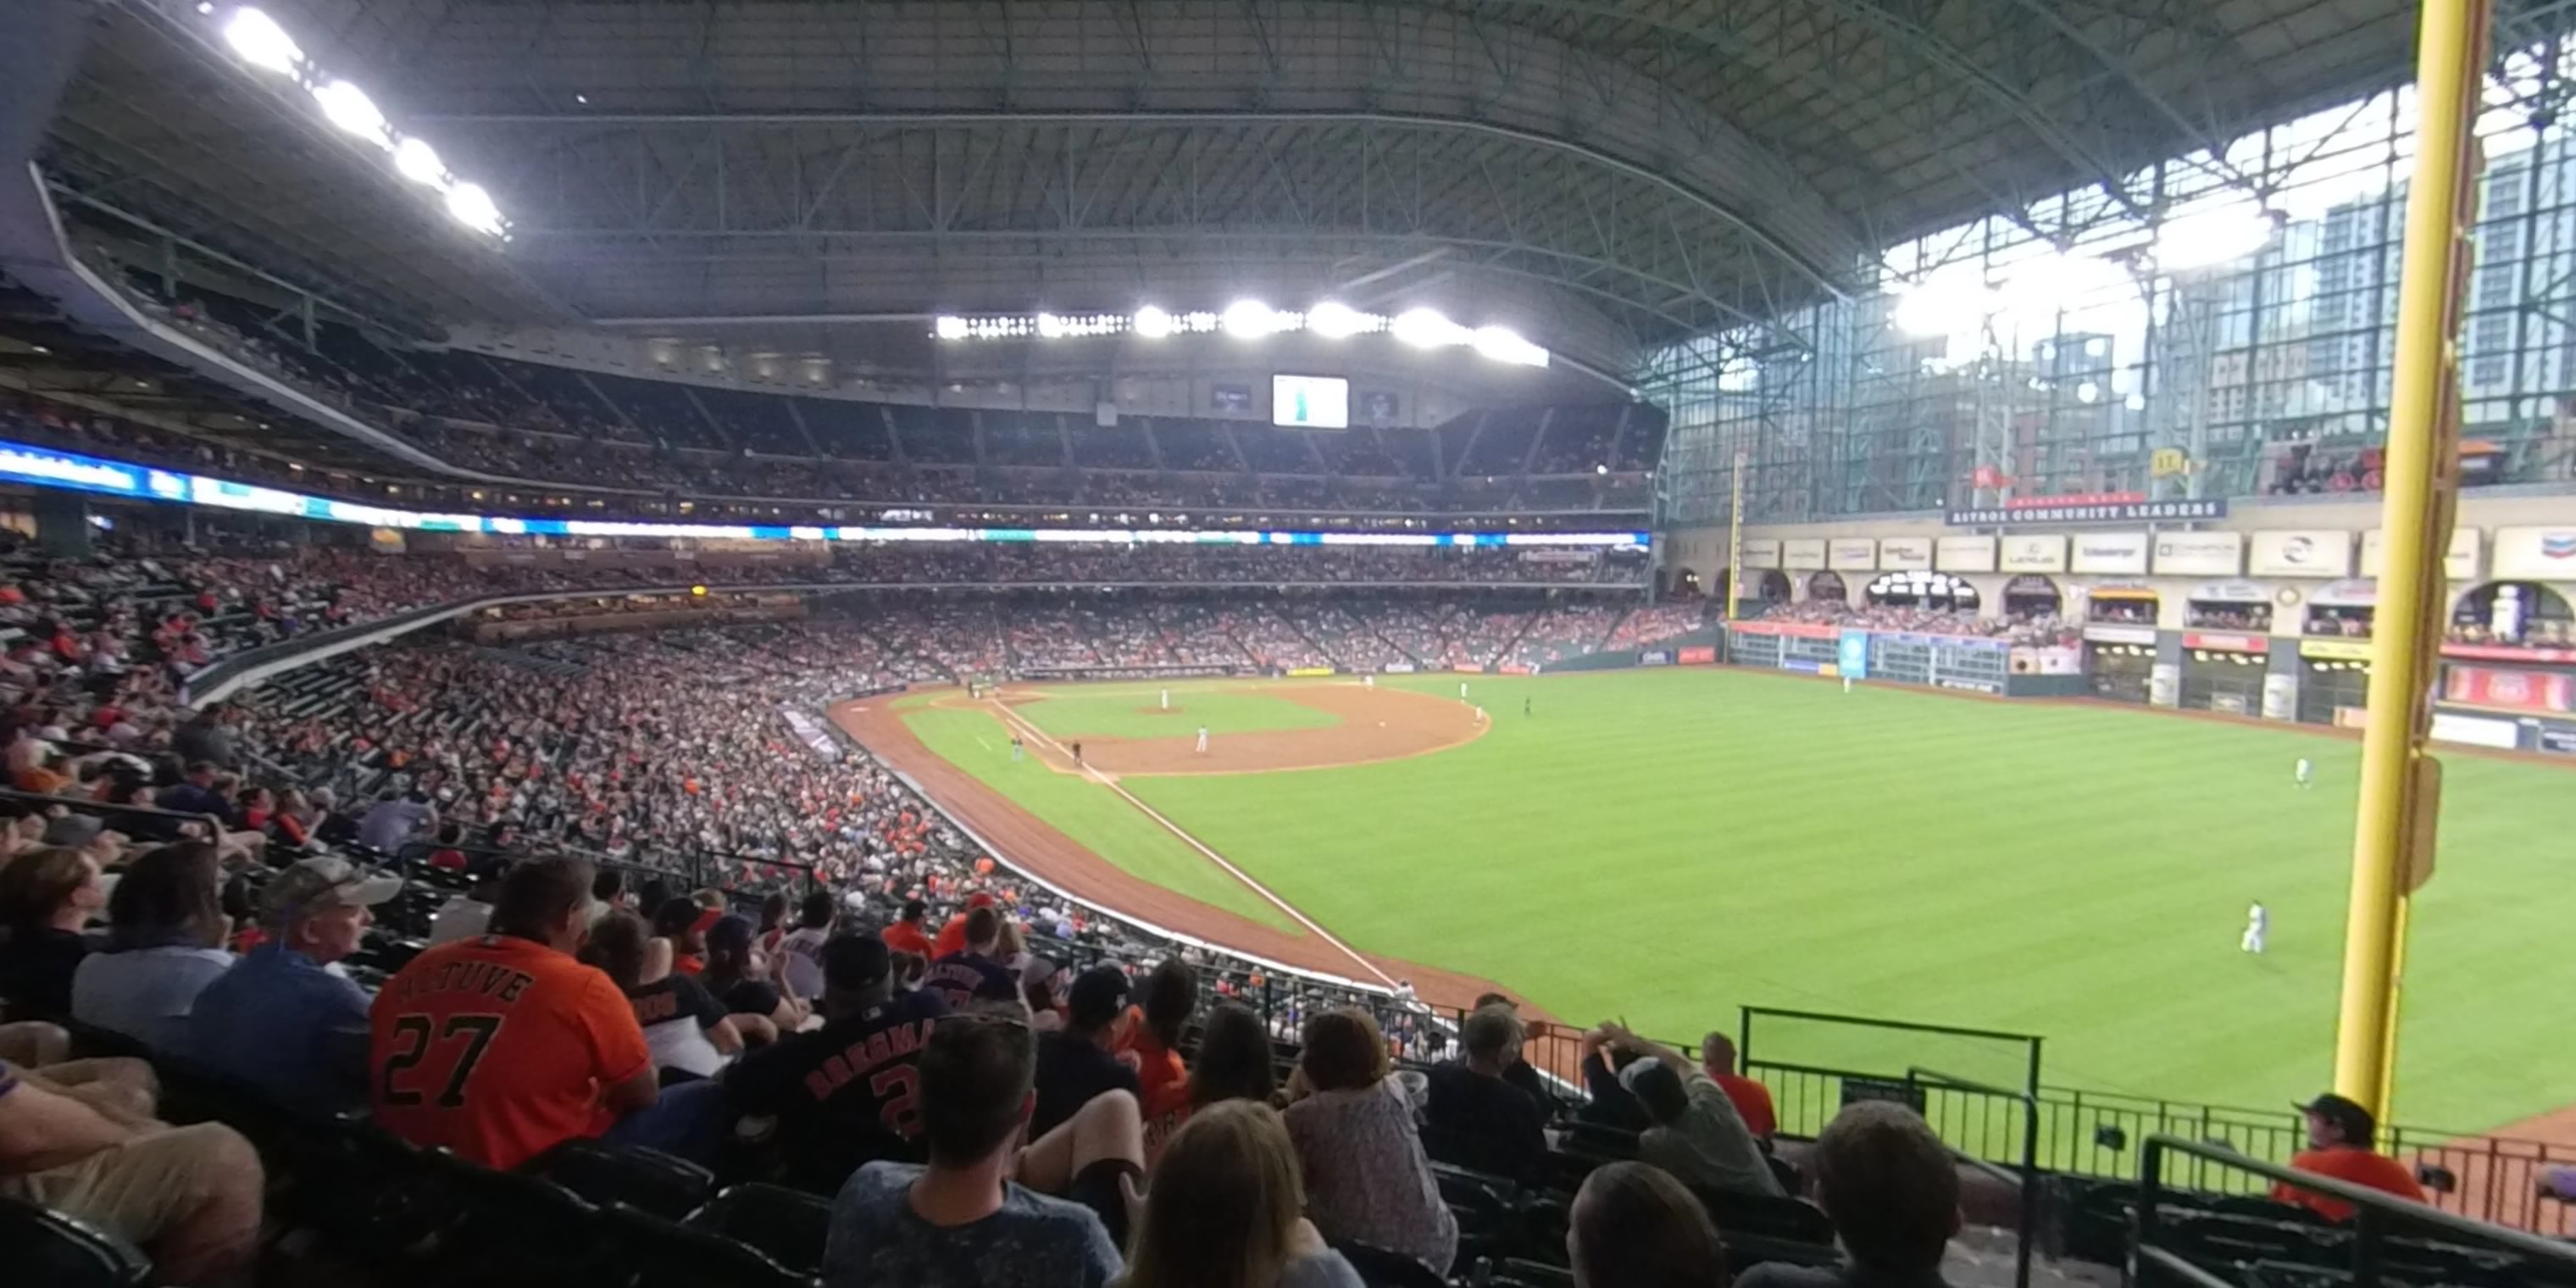 section 233 panoramic seat view  for baseball - minute maid park